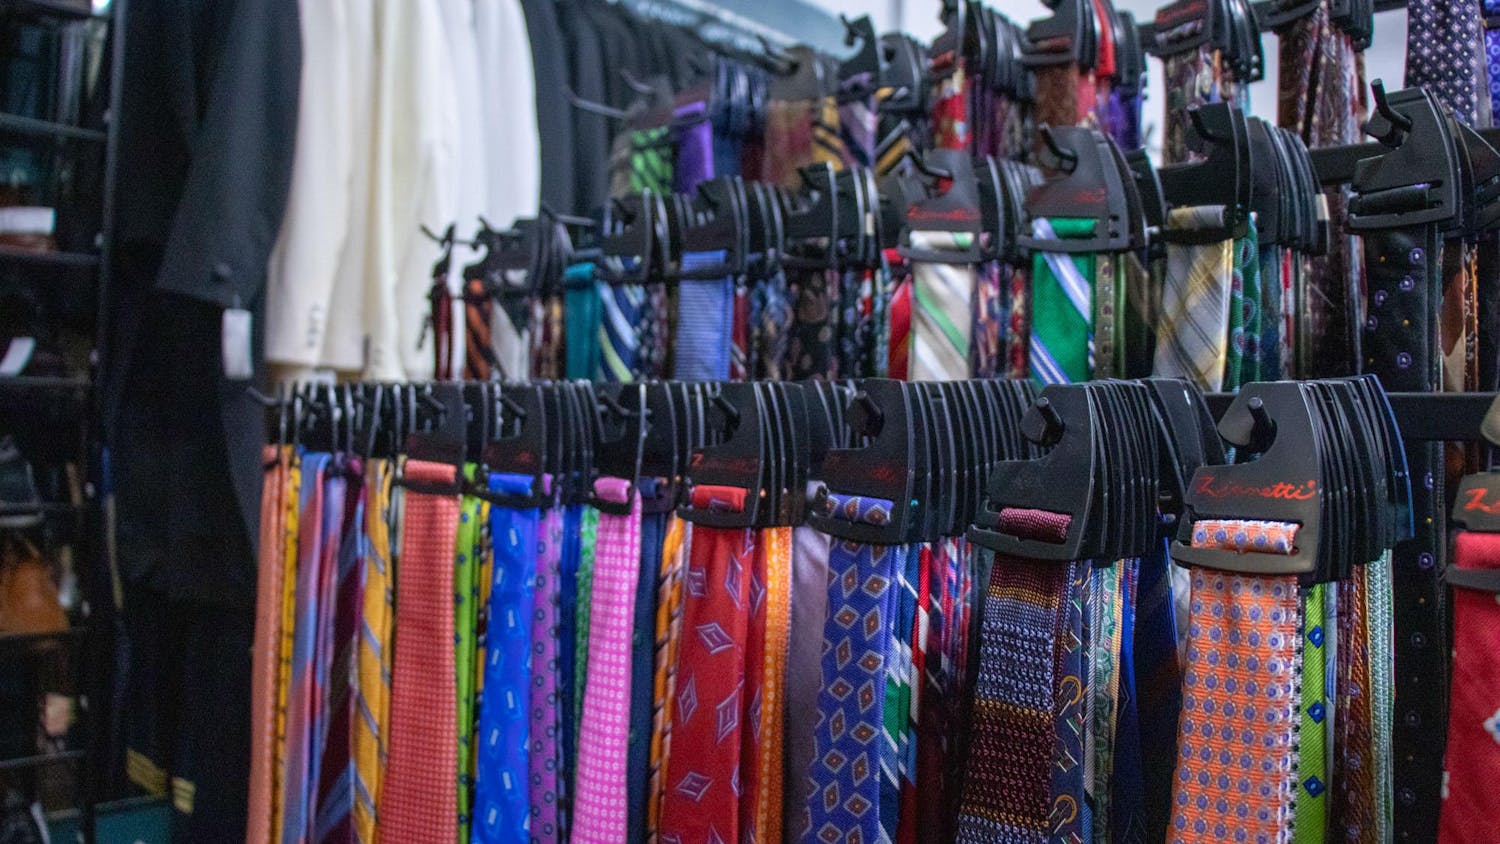 An assortment of ties hang on display inside the Gentleman's Closet consignment shop in Five Points on Jan. 30, 2024. The shop sources many of its ties from other men’s clothing stores that are replacing out-of-season clothes.